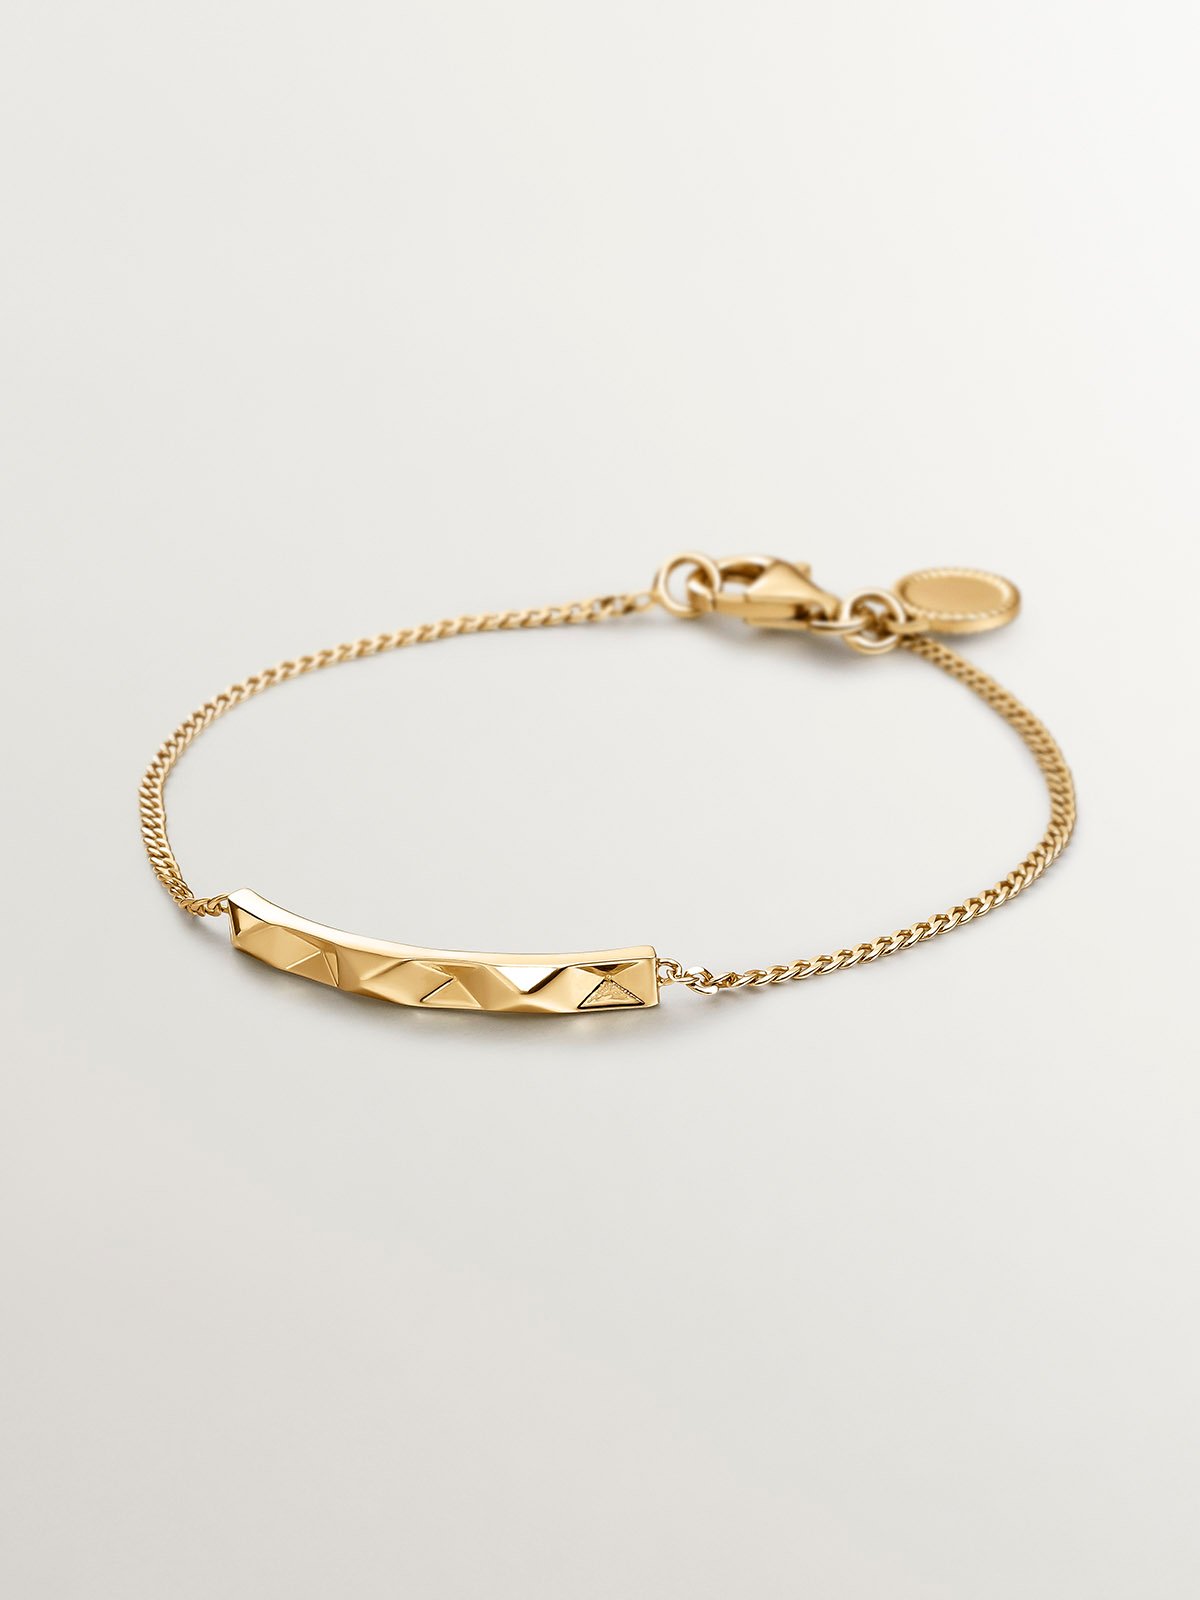 925 silver bracelet bathed in 18K yellow gold with geometric texture